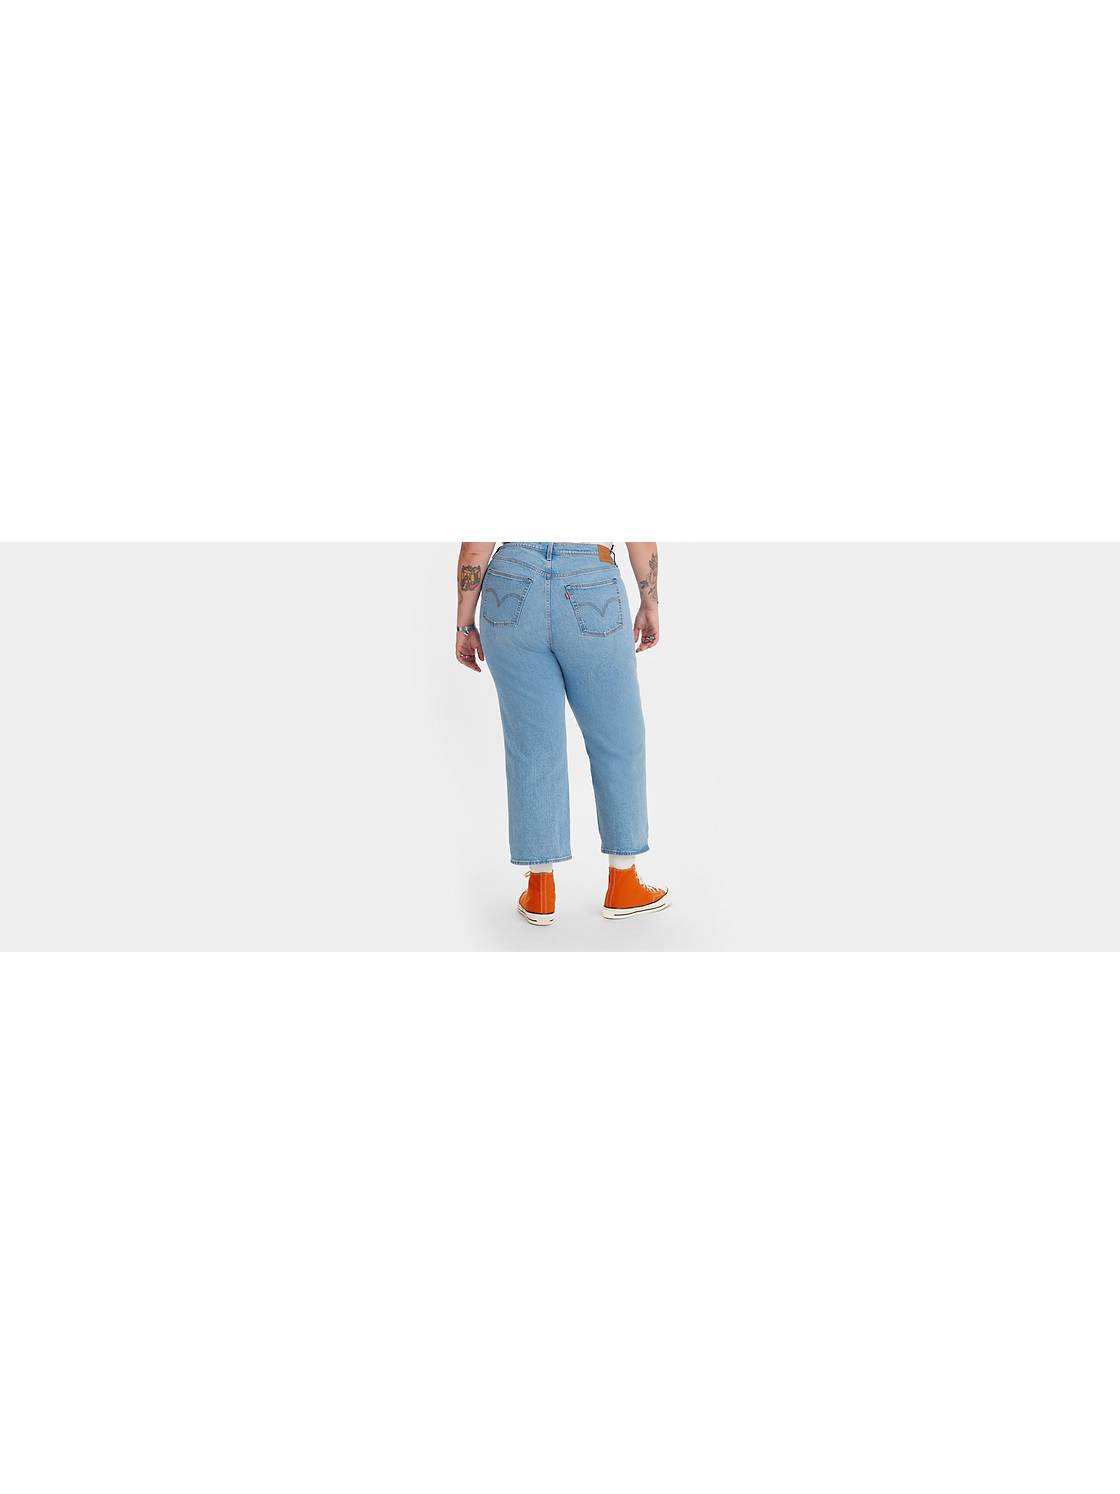 Levis Womens Ribcage Straight Ankle Jeans Plus-Size Water 